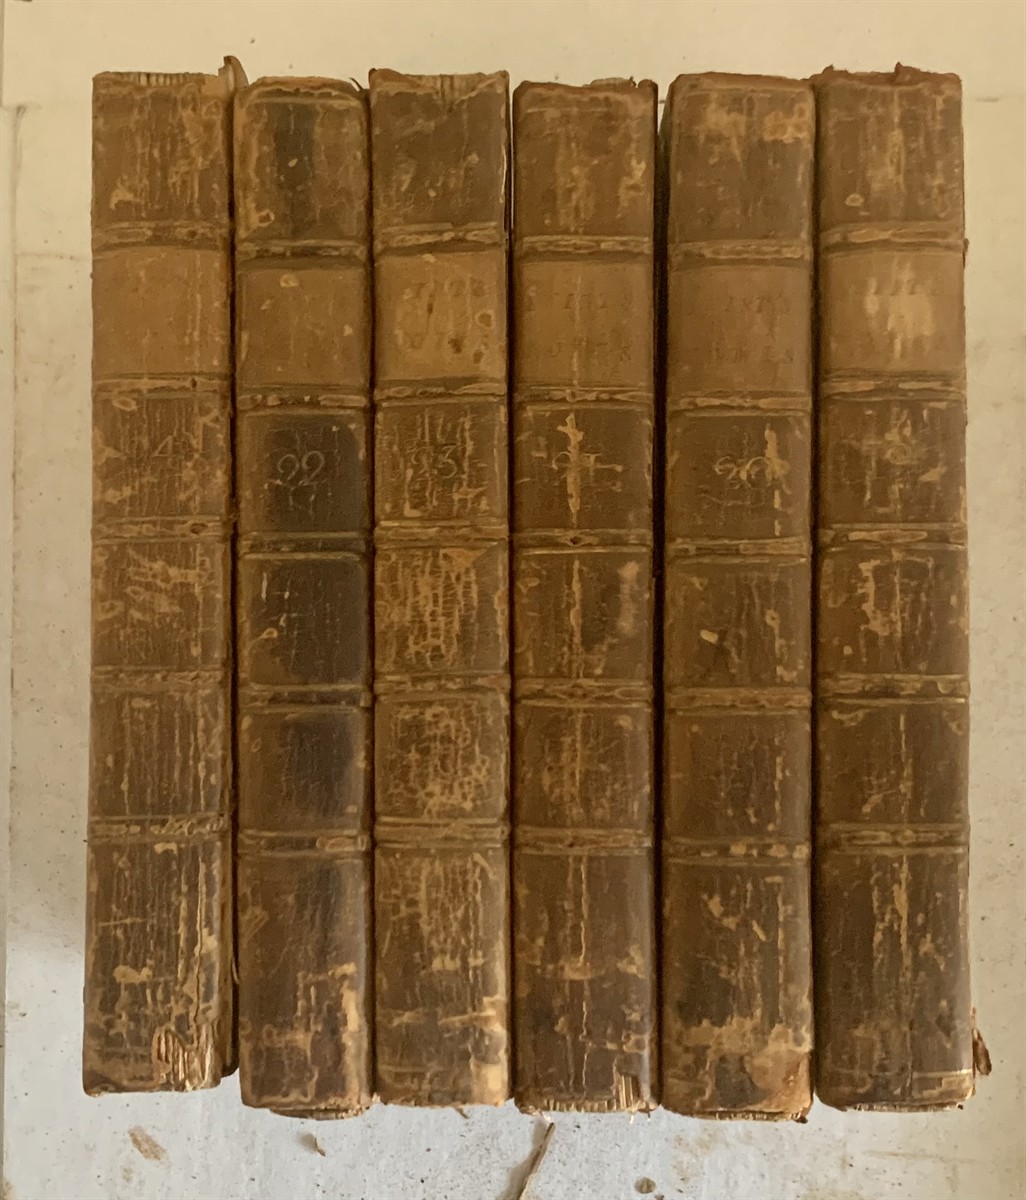 Image for The Works of Dr. Jonathan Swift in 12 Volumes, Accurately Revised (24 Volumes)  Vols. 1-18 (1766, Bathurst) , ( 3 Vols. Letters Written by Swift, 1768, Daviesm 7th Ed. ) (3 Vols. Letters Bathurst, 1769, 3rd Ed. )